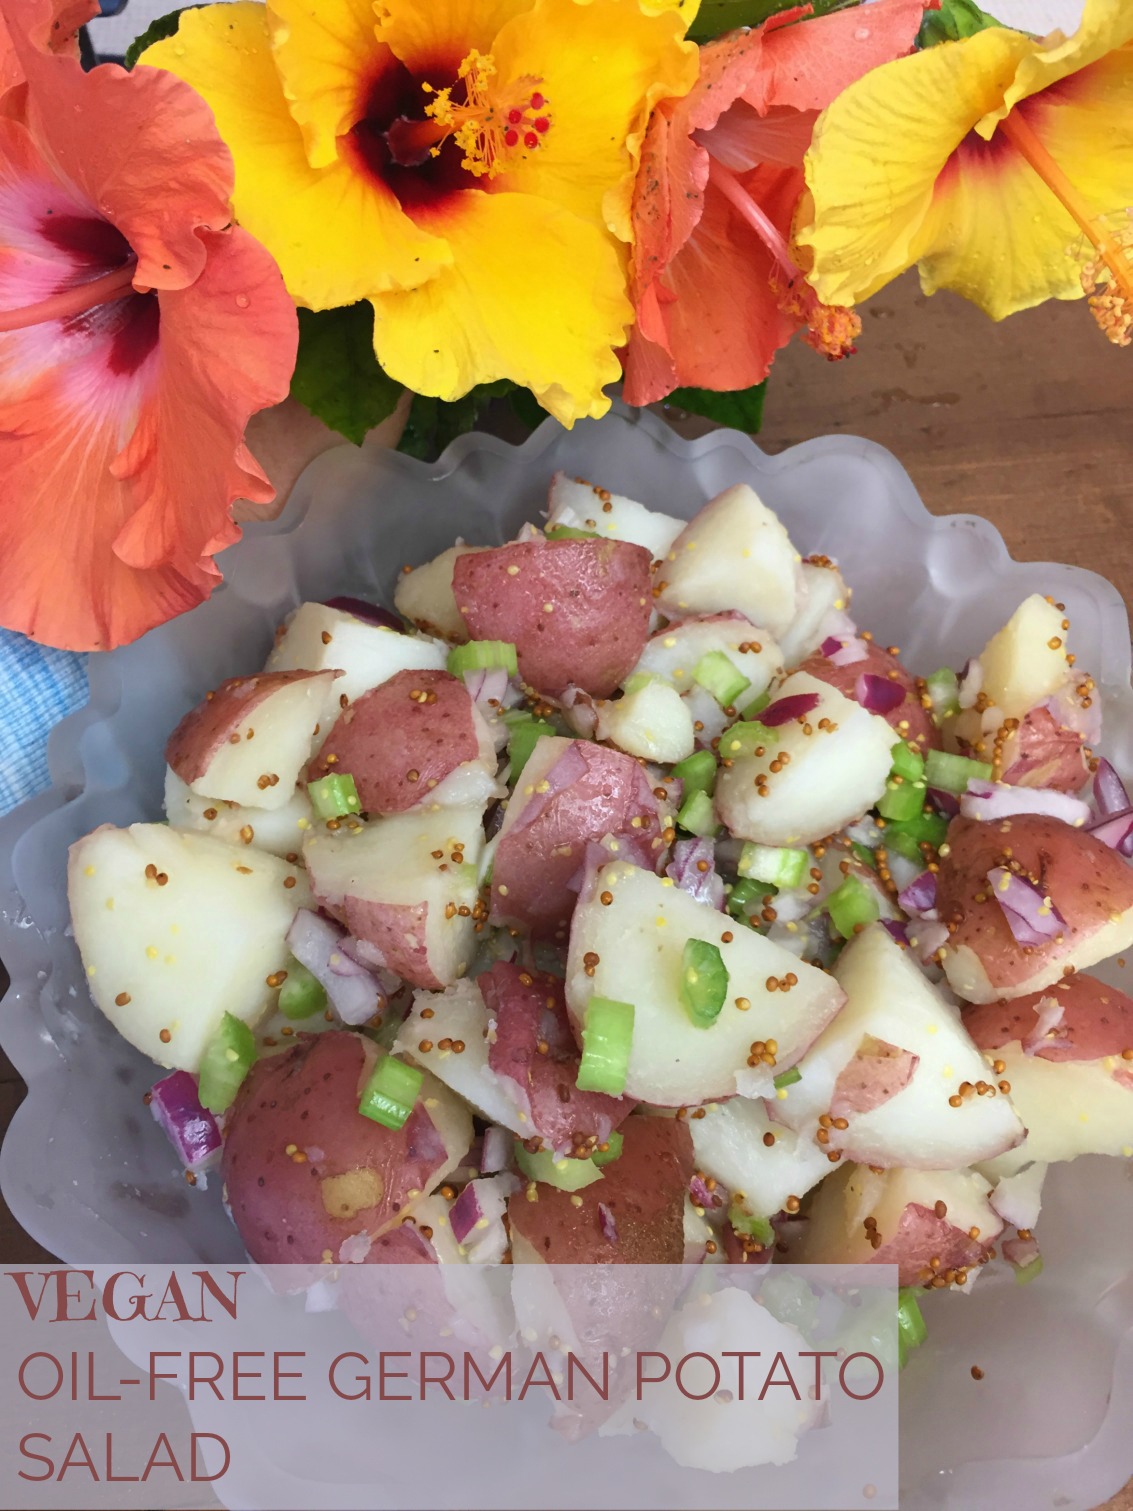 This vegan oil-free German potato salad is a light and tangy potato salad that is tasty as a side dish or a meal. It's great to share at potlucks!